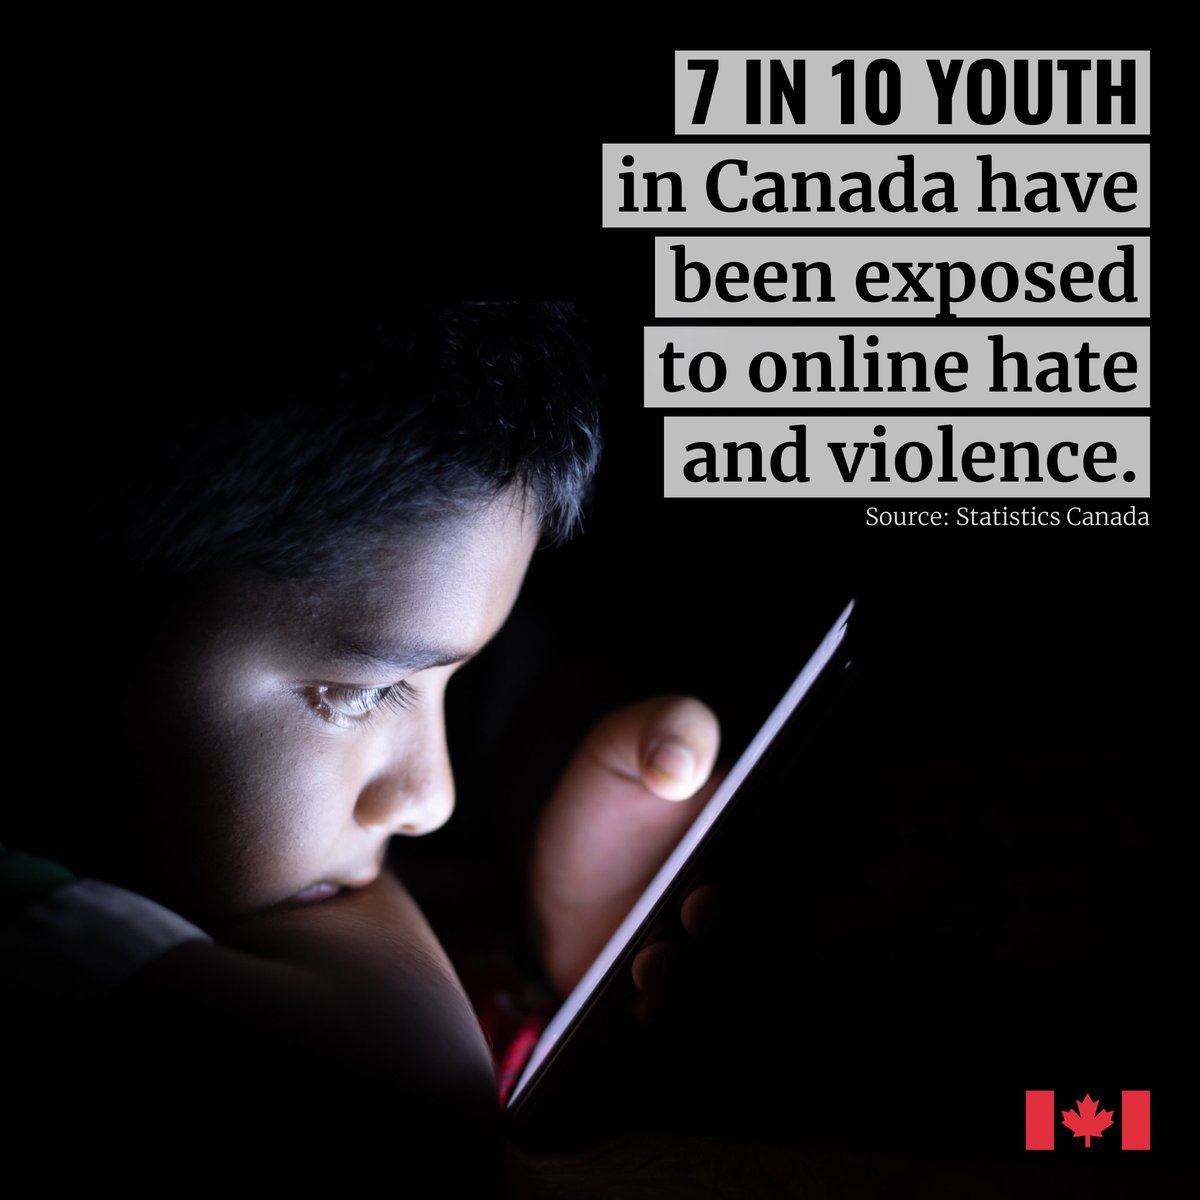 The Online Harms Act is our plan to #ProtectKidsOnline and #StopHate. Parents and victims across Canada agree—we need safety standards online. 

Learn more: canada.ca/en/canadian-he…